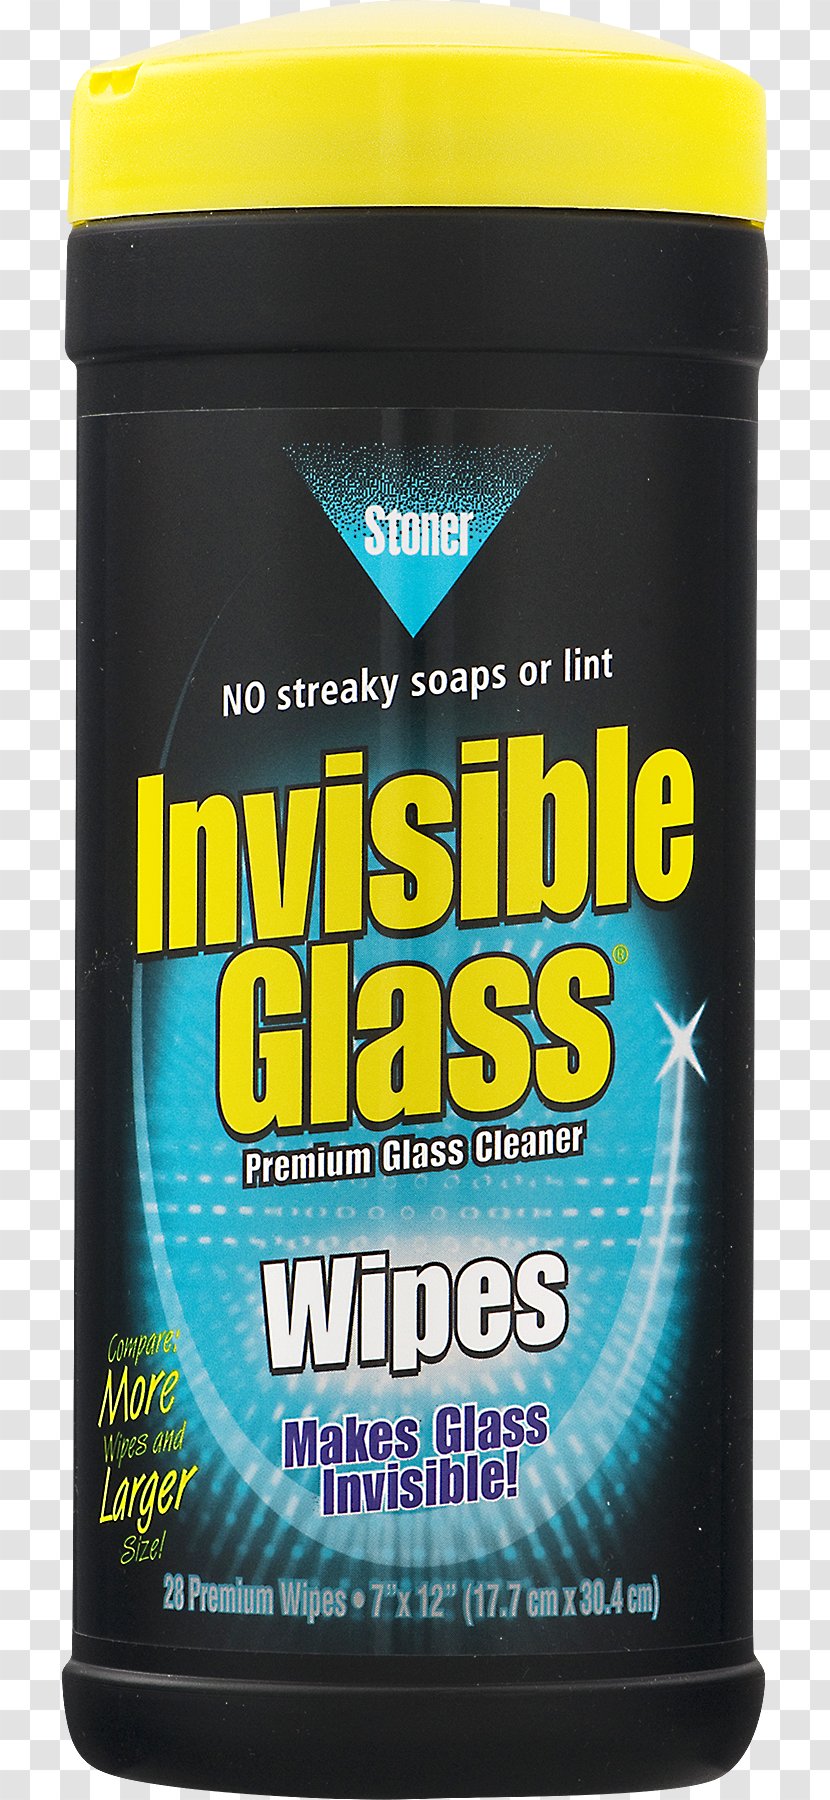 Dietary Supplement Brand Stoner Invisible Glass Cleaner Stoner, Inc. Product - Diet Transparent PNG